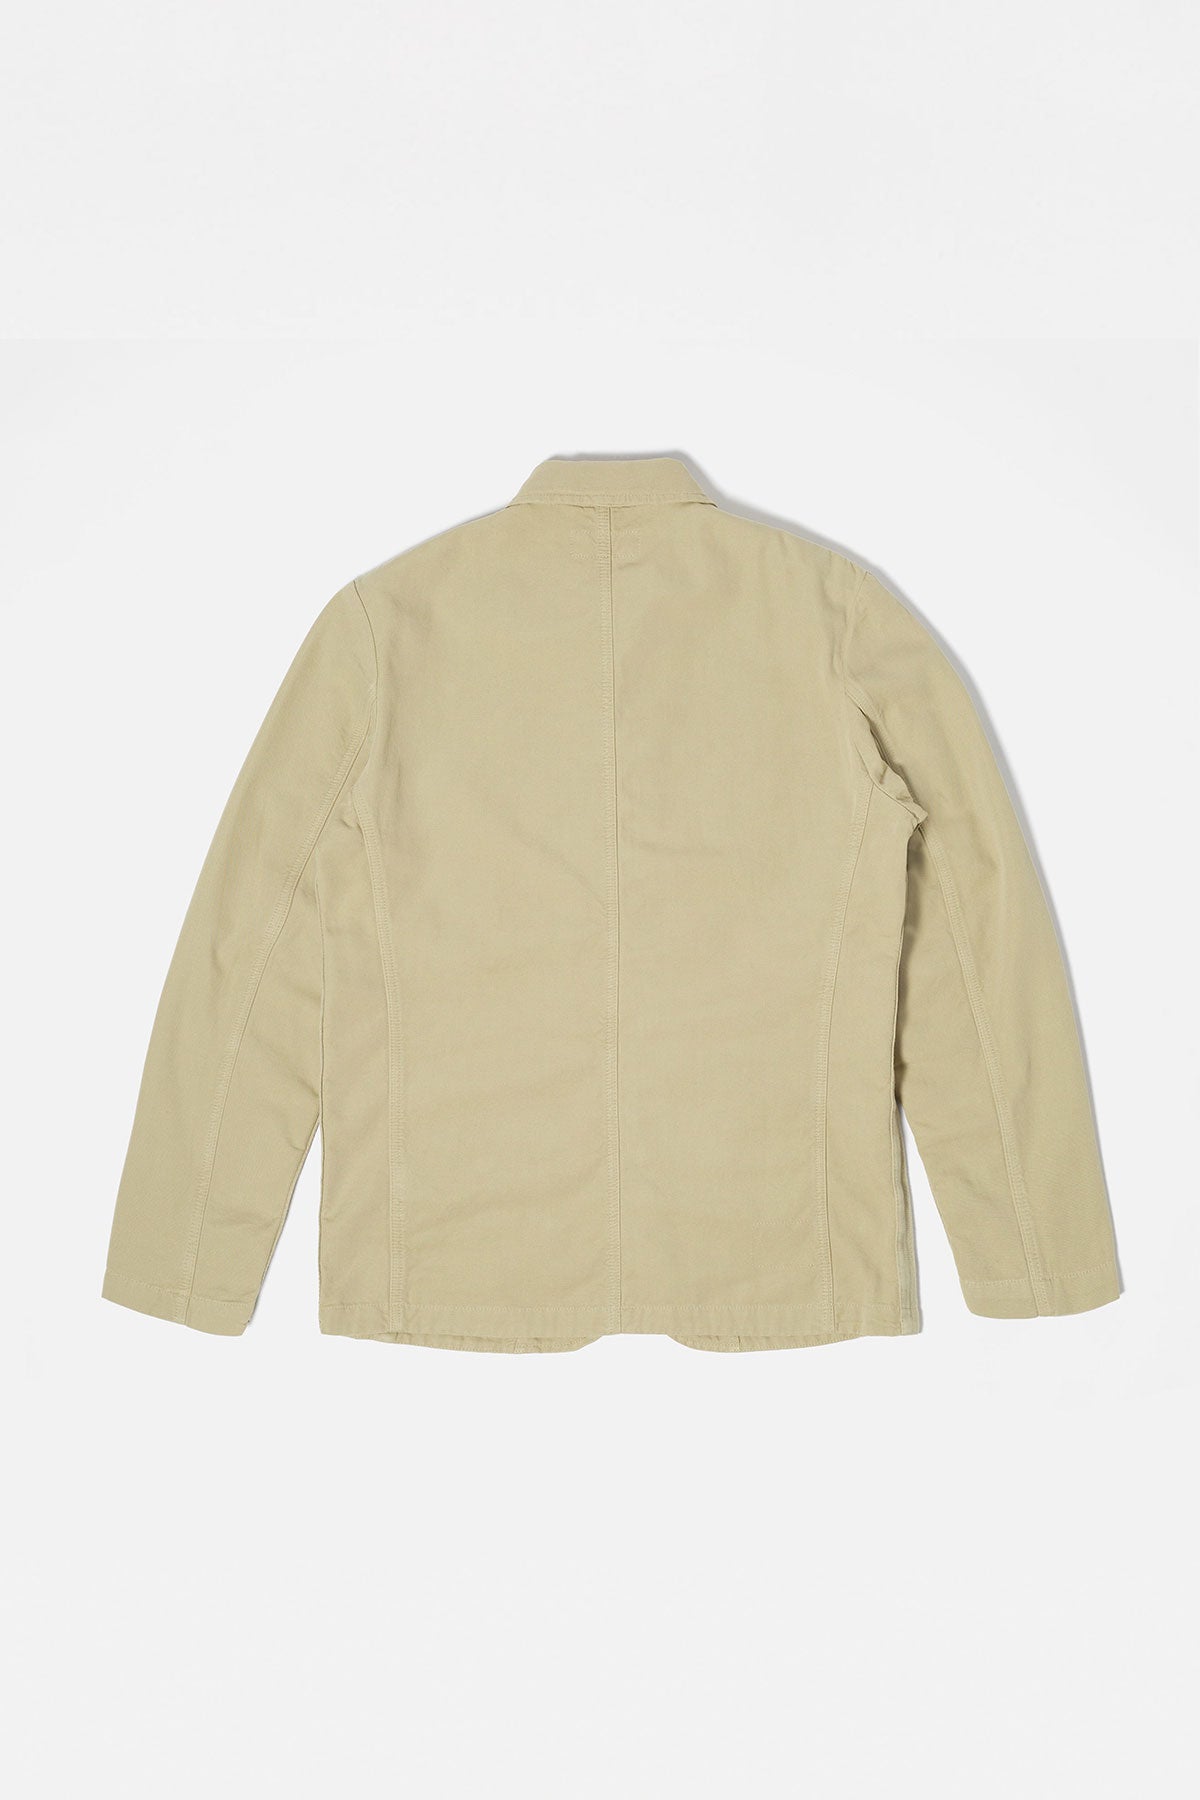 Universal Works Bakers Jacket In Sand Canvas – The Rugged Society